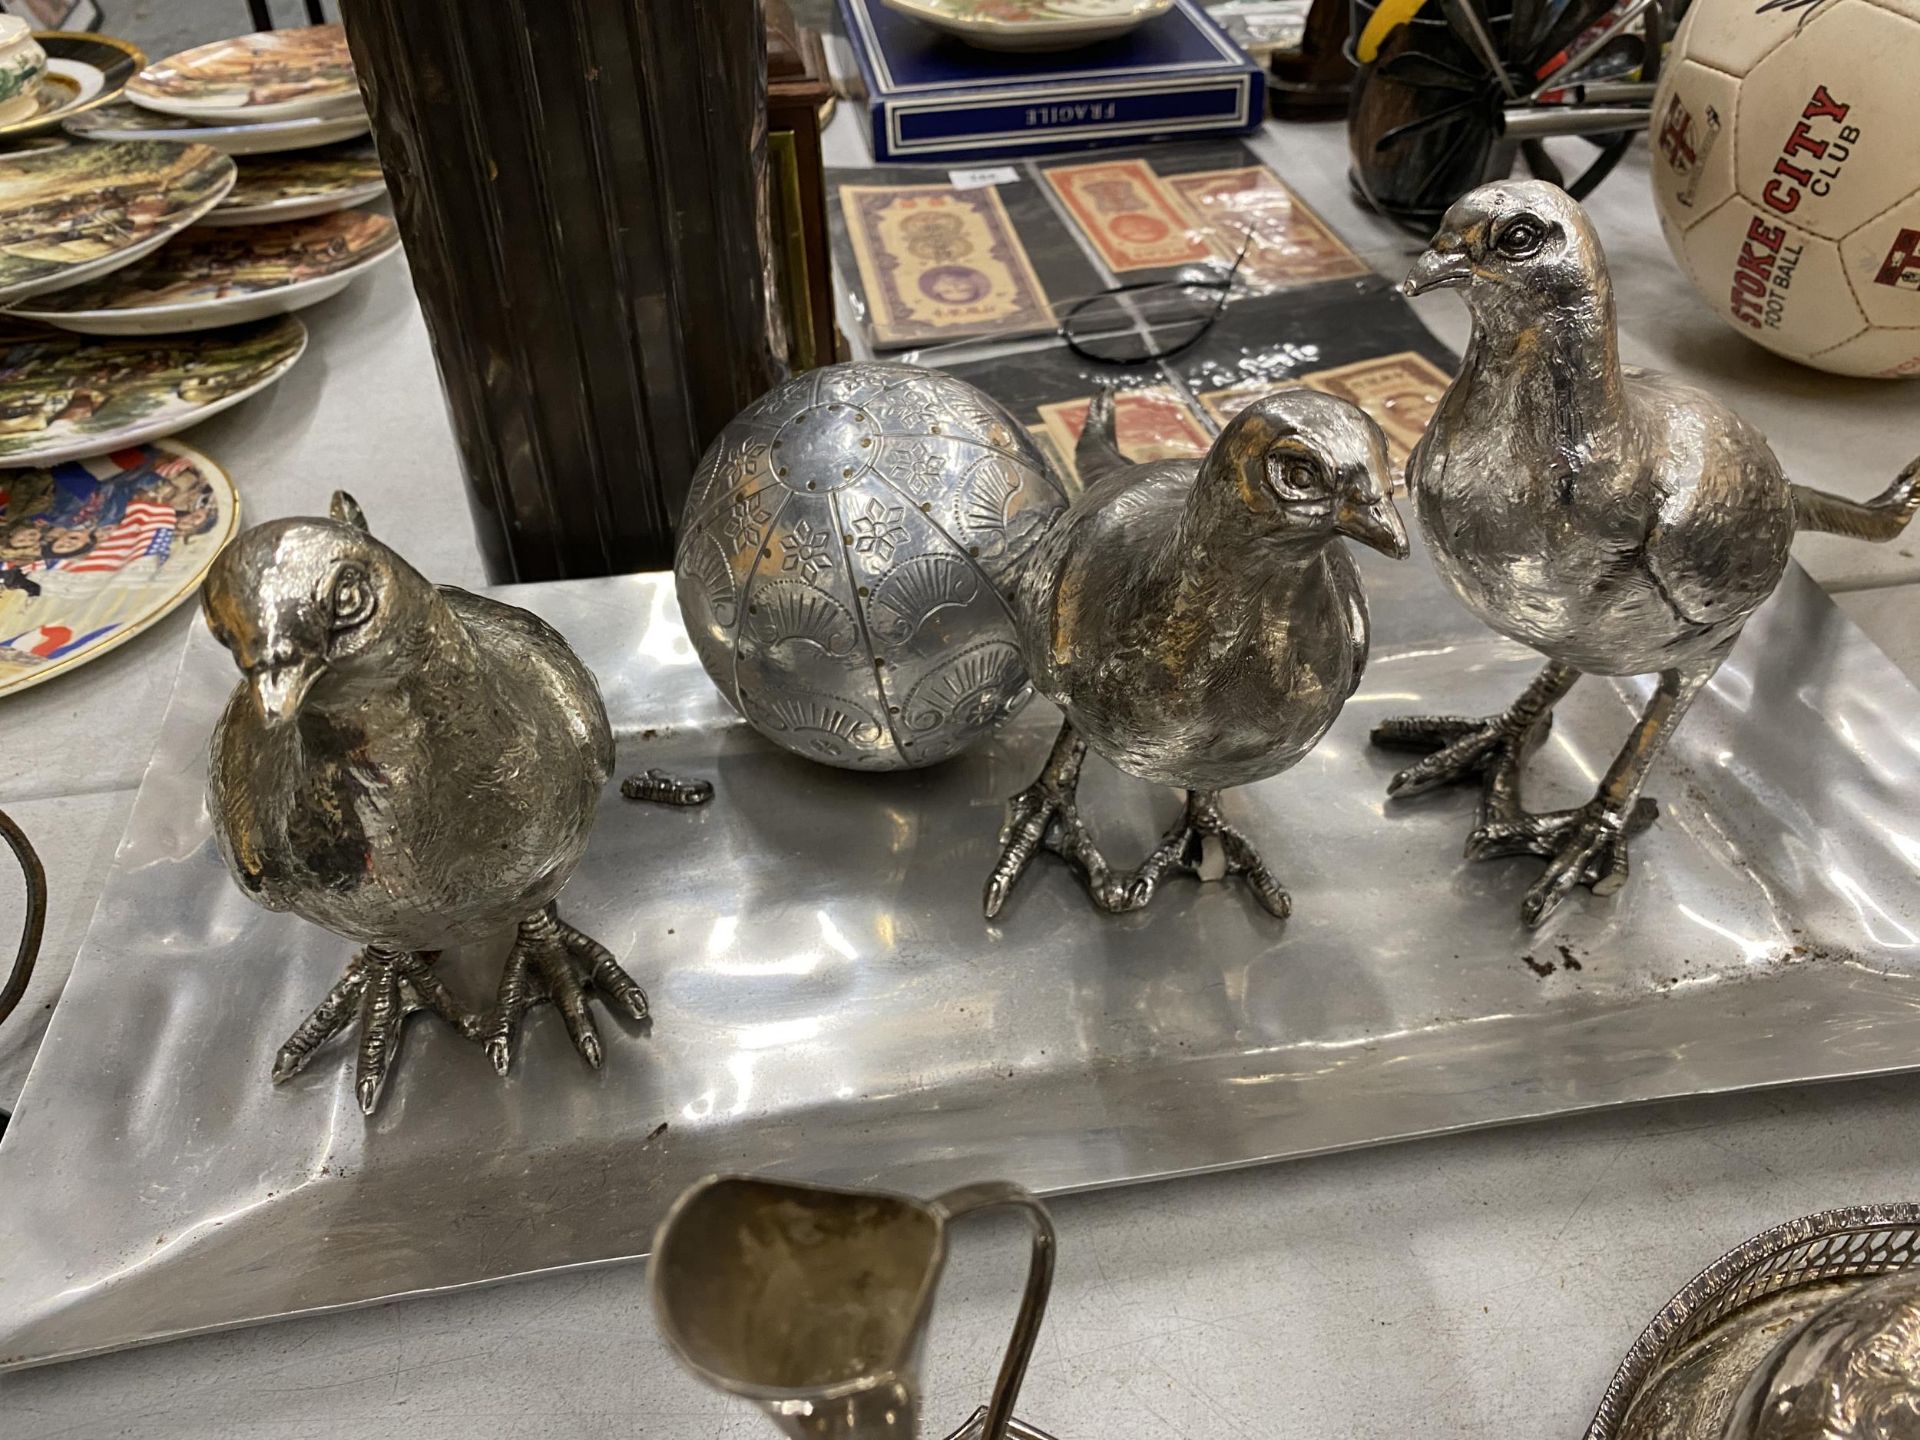 THREE LARGE SILVER COLOURED MODELS OF PHEASANTS, HEIGHT 22CM, LENGTH 34CM - TWO MISSING TOES, A - Image 2 of 3